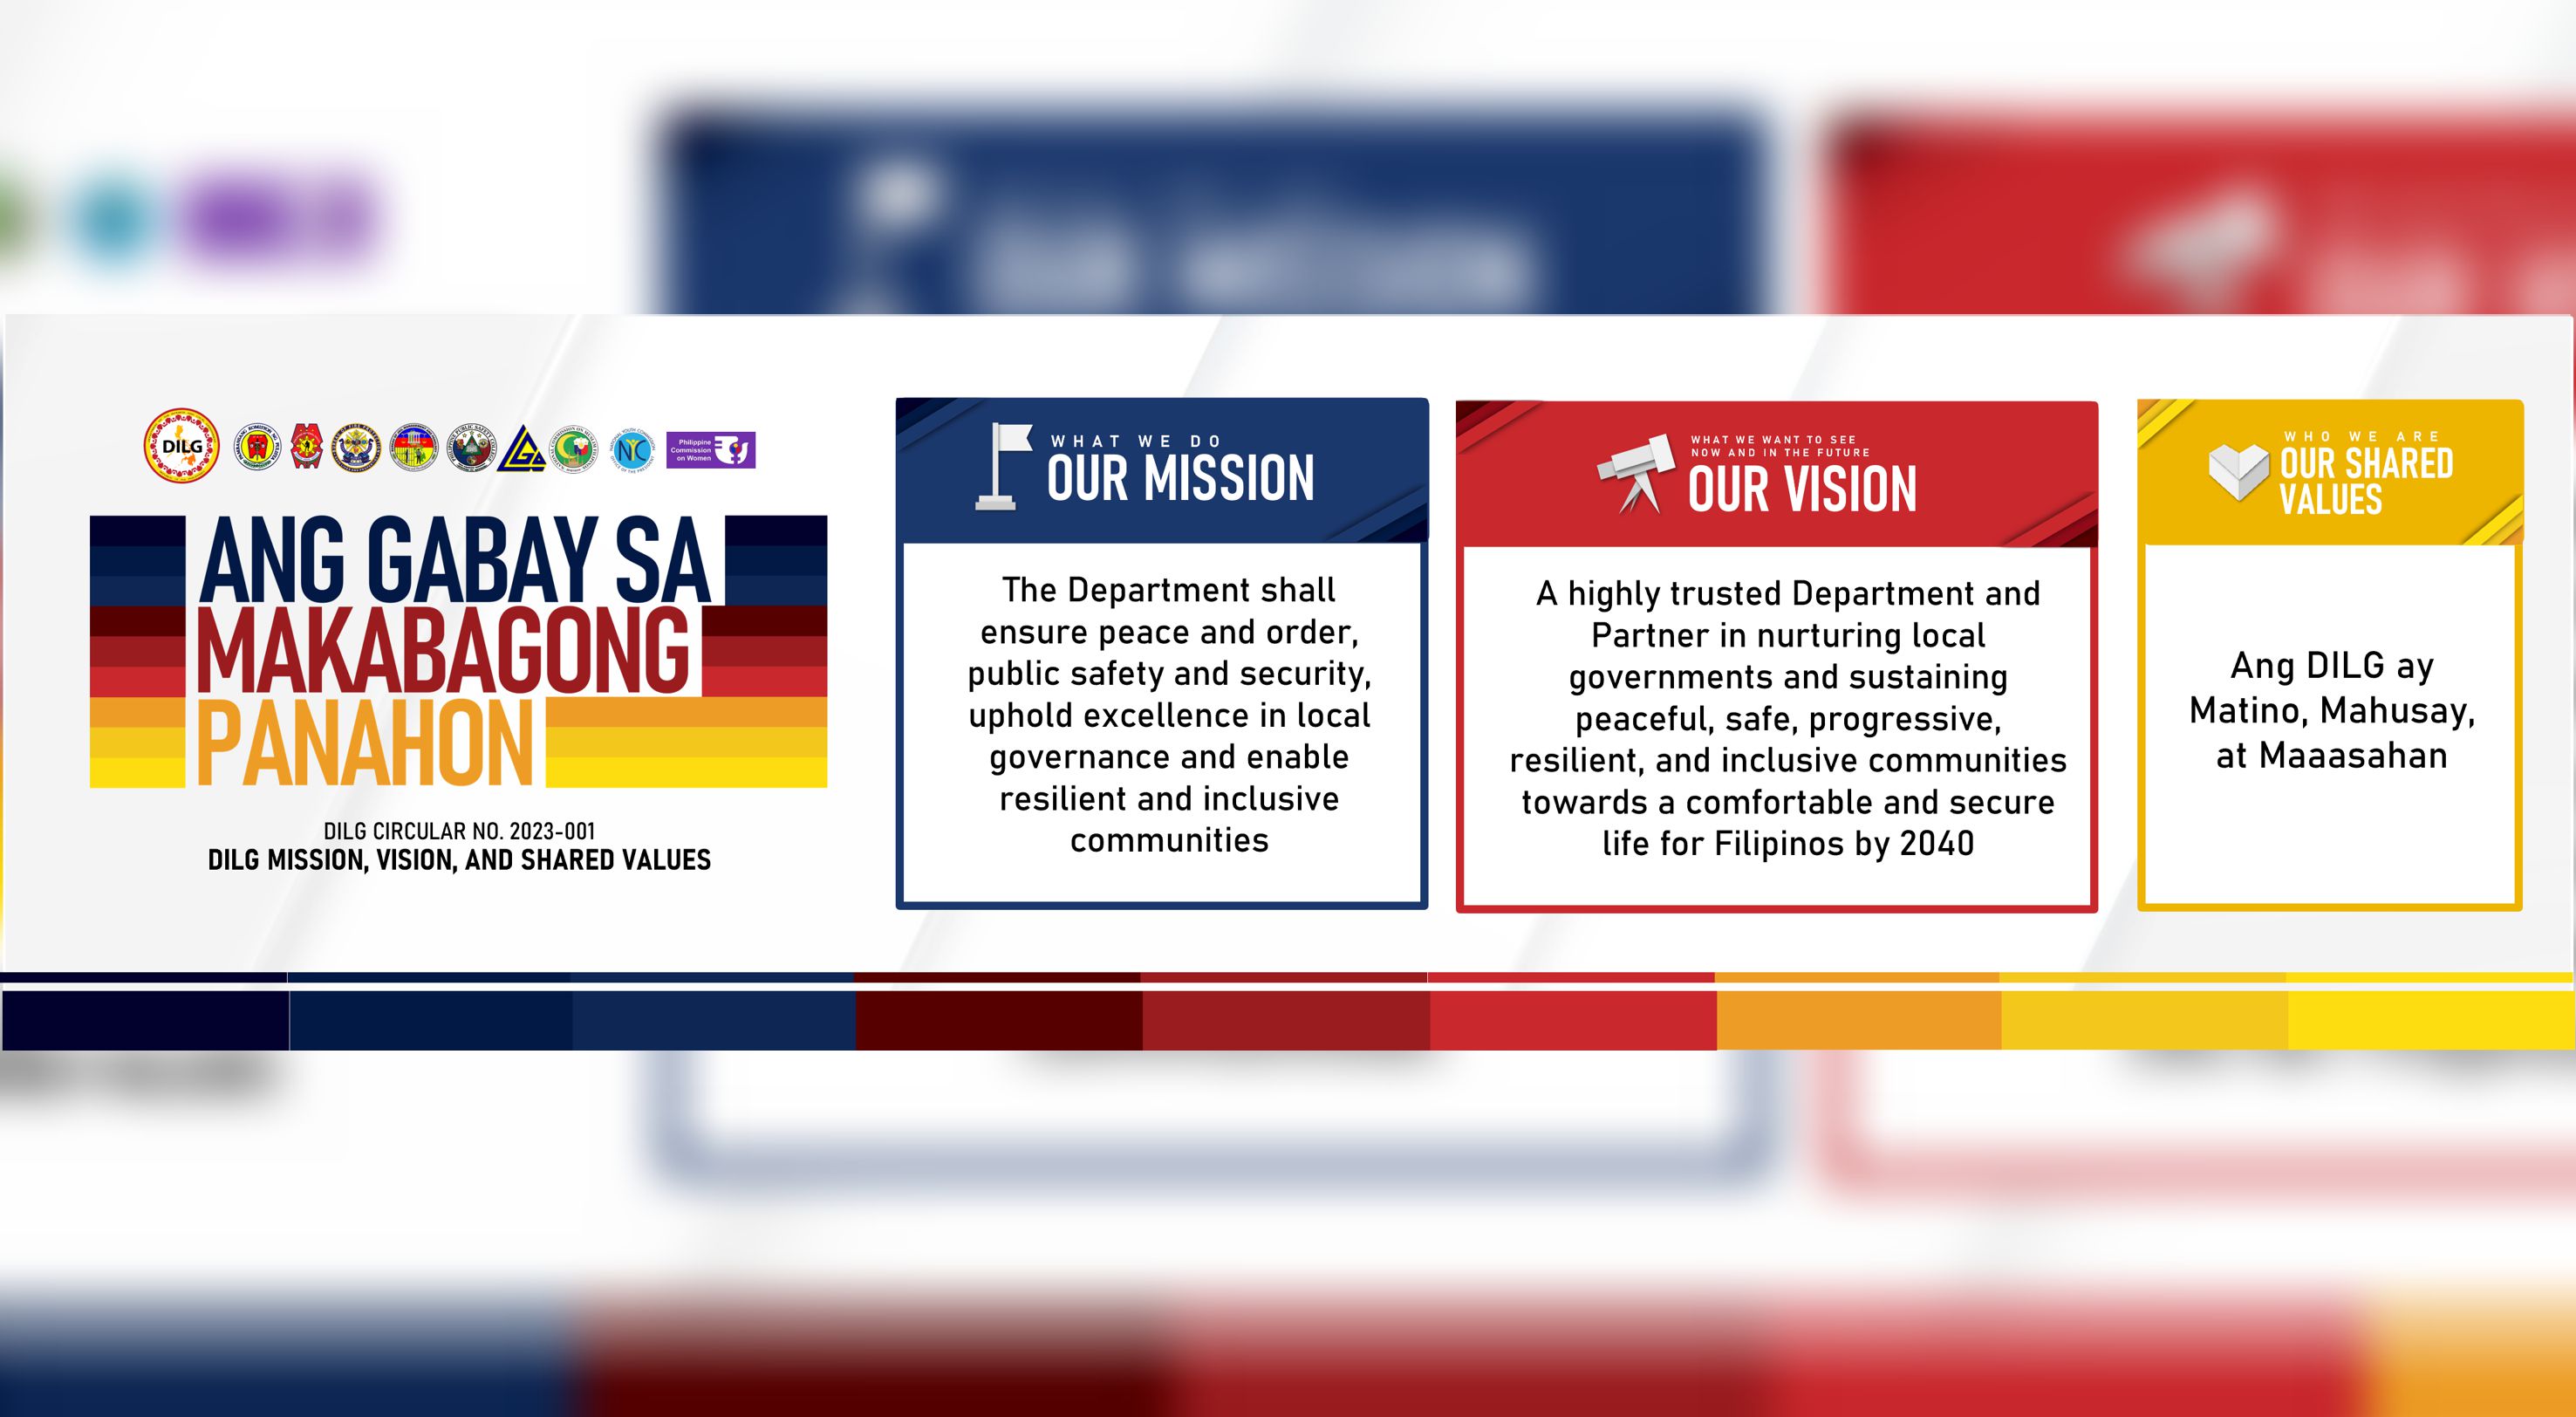 The Enhanced DILG MISSION, VISION, and SHARED VALUES